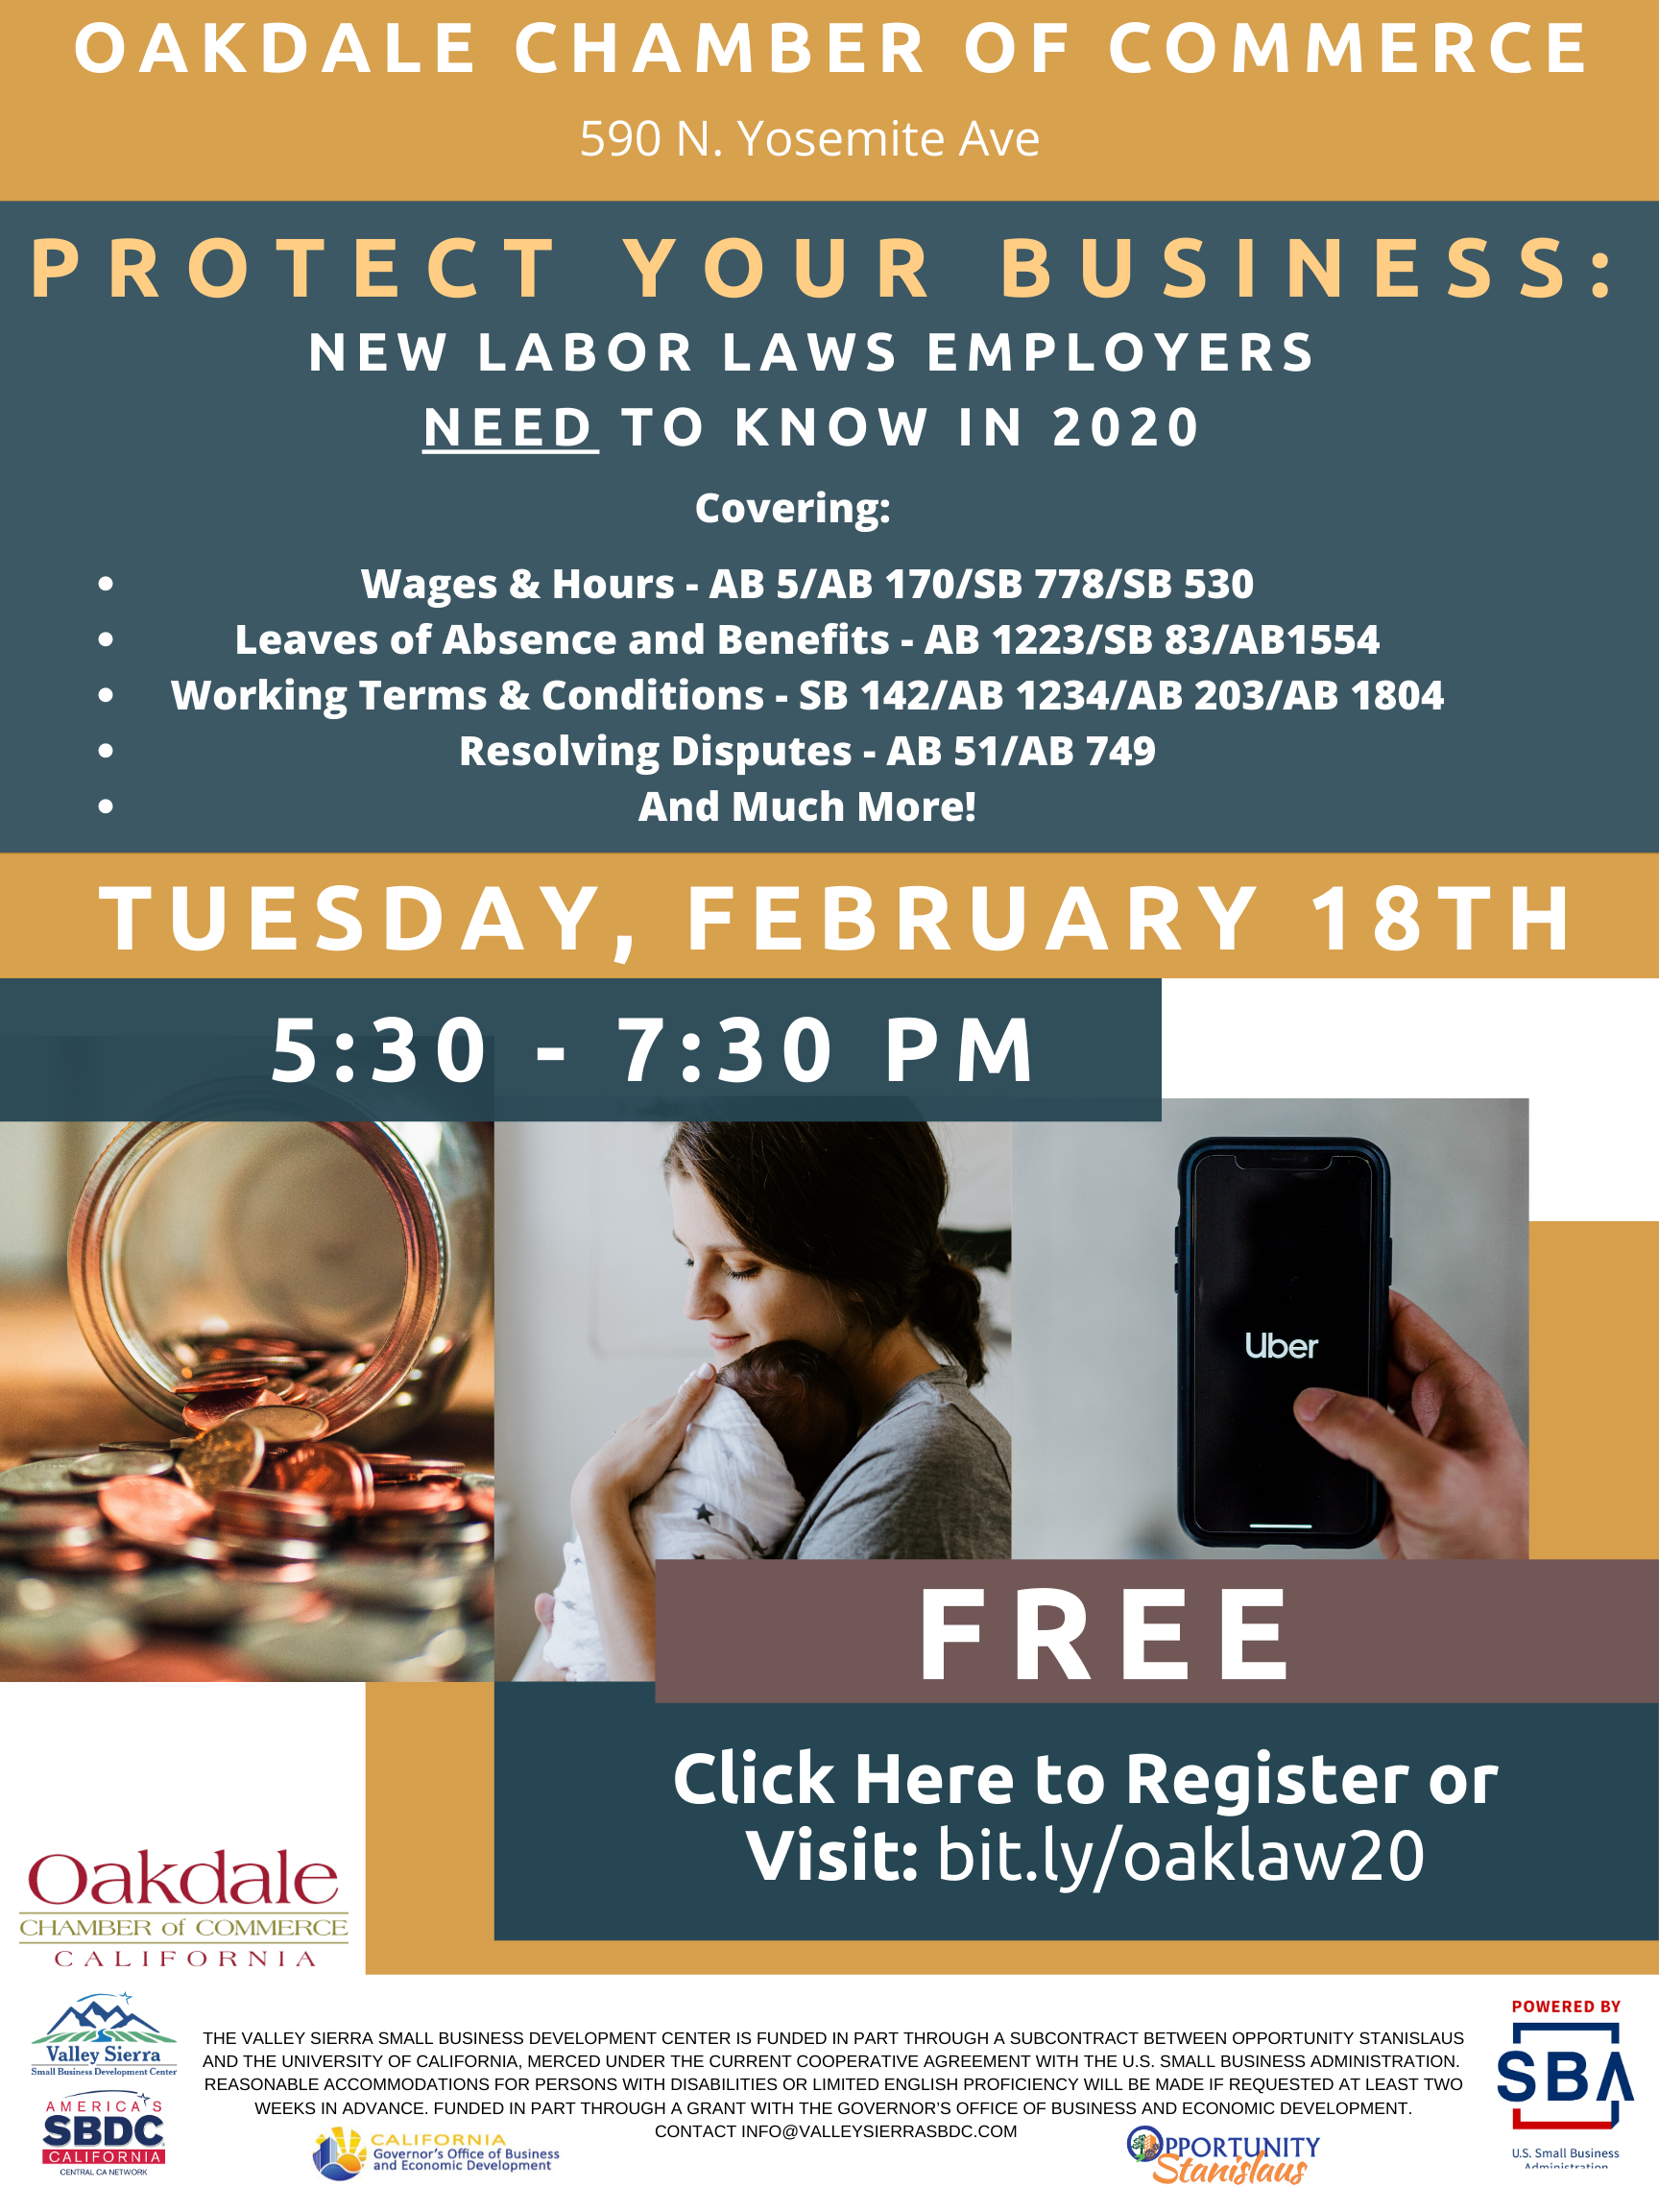 Event Flyer, Oakdale Employment Law Updates for 2020, Oakdale Chamber of Commerce. 2/18/2020, FREE.